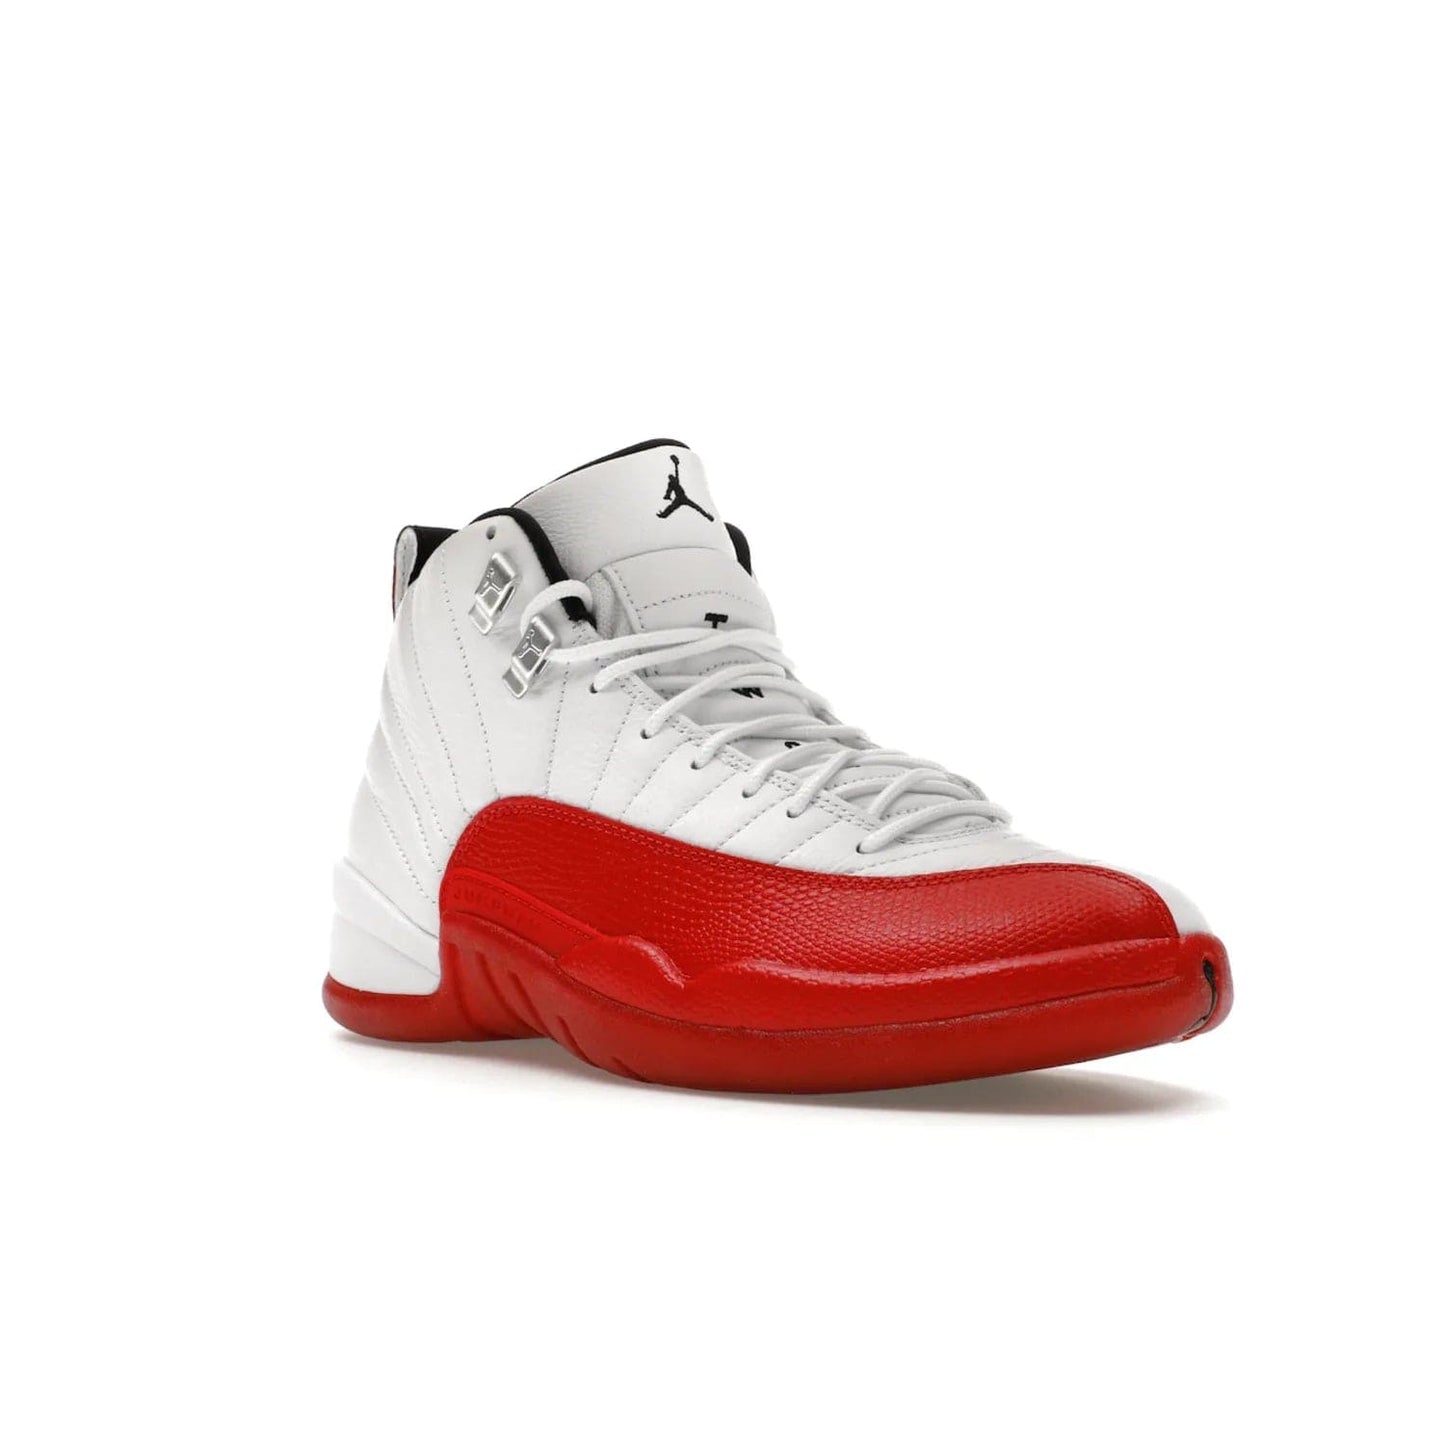 Jordan 12 Retro Cherry (2023) - Image 5 - Only at www.BallersClubKickz.com - Live your sneaker legend with the Jordan 12 Retro Cherry. Iconic pebbled leather mudguards, quilted uppers, and varsity red accents make this 1997 classic a must-have for 2023. Shine on with silver hardware and matching midsoles, and bring it all together for limited-edition style on October 28th. Step into Jordan legacy with the Retro Cherry.